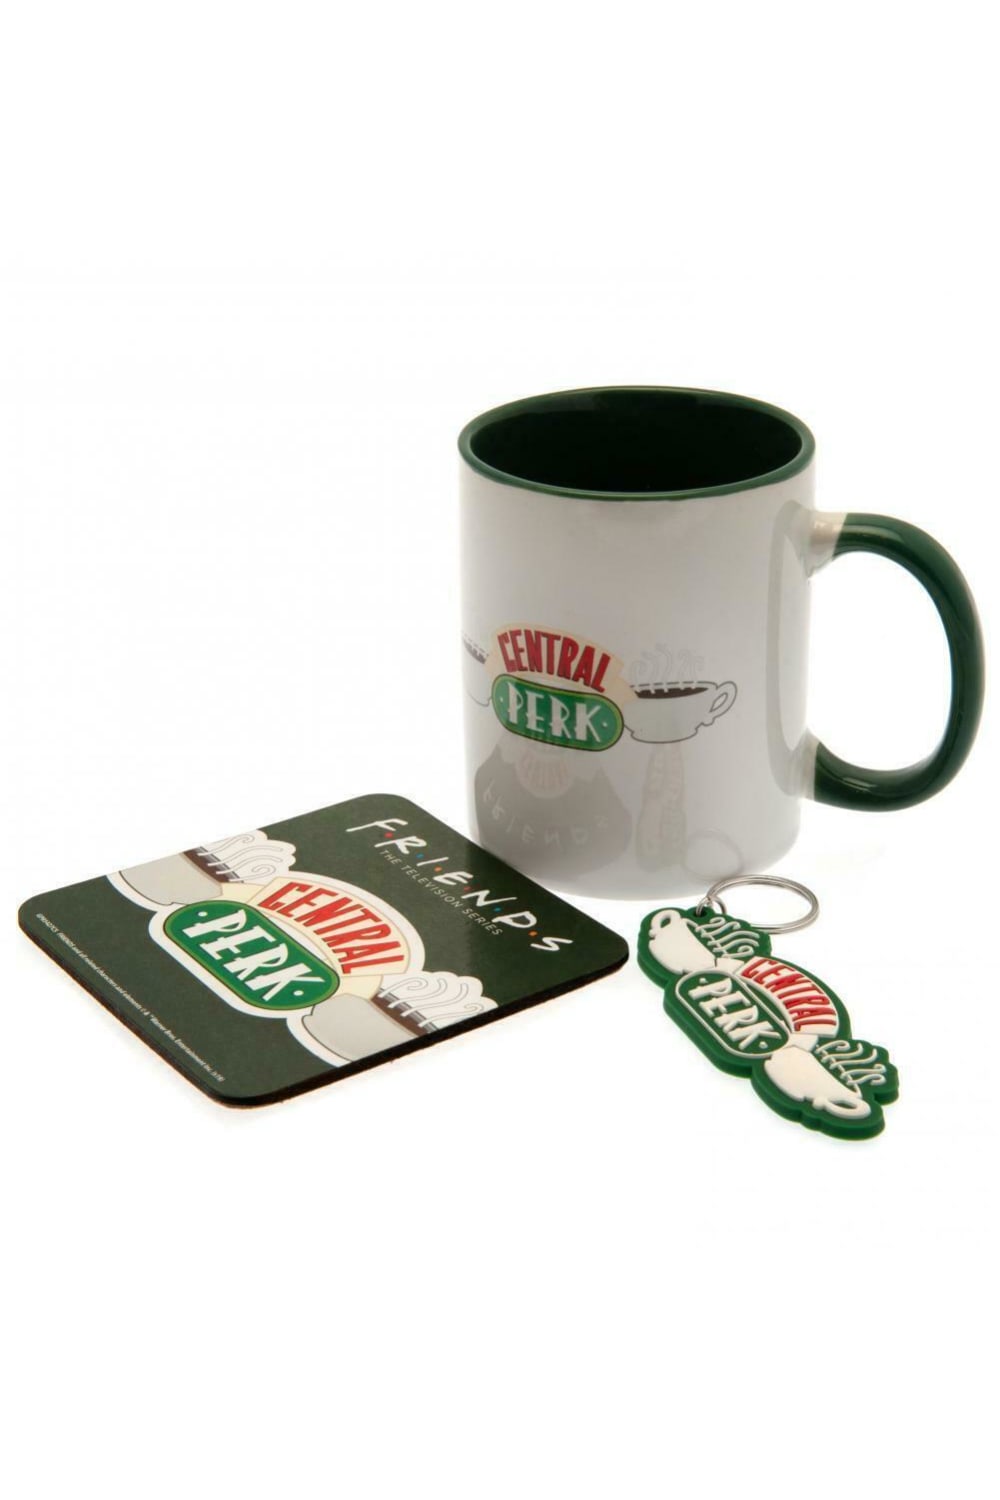 Friends Central Perk Mug and Coaster Set (Green/White/Red) (One Size)